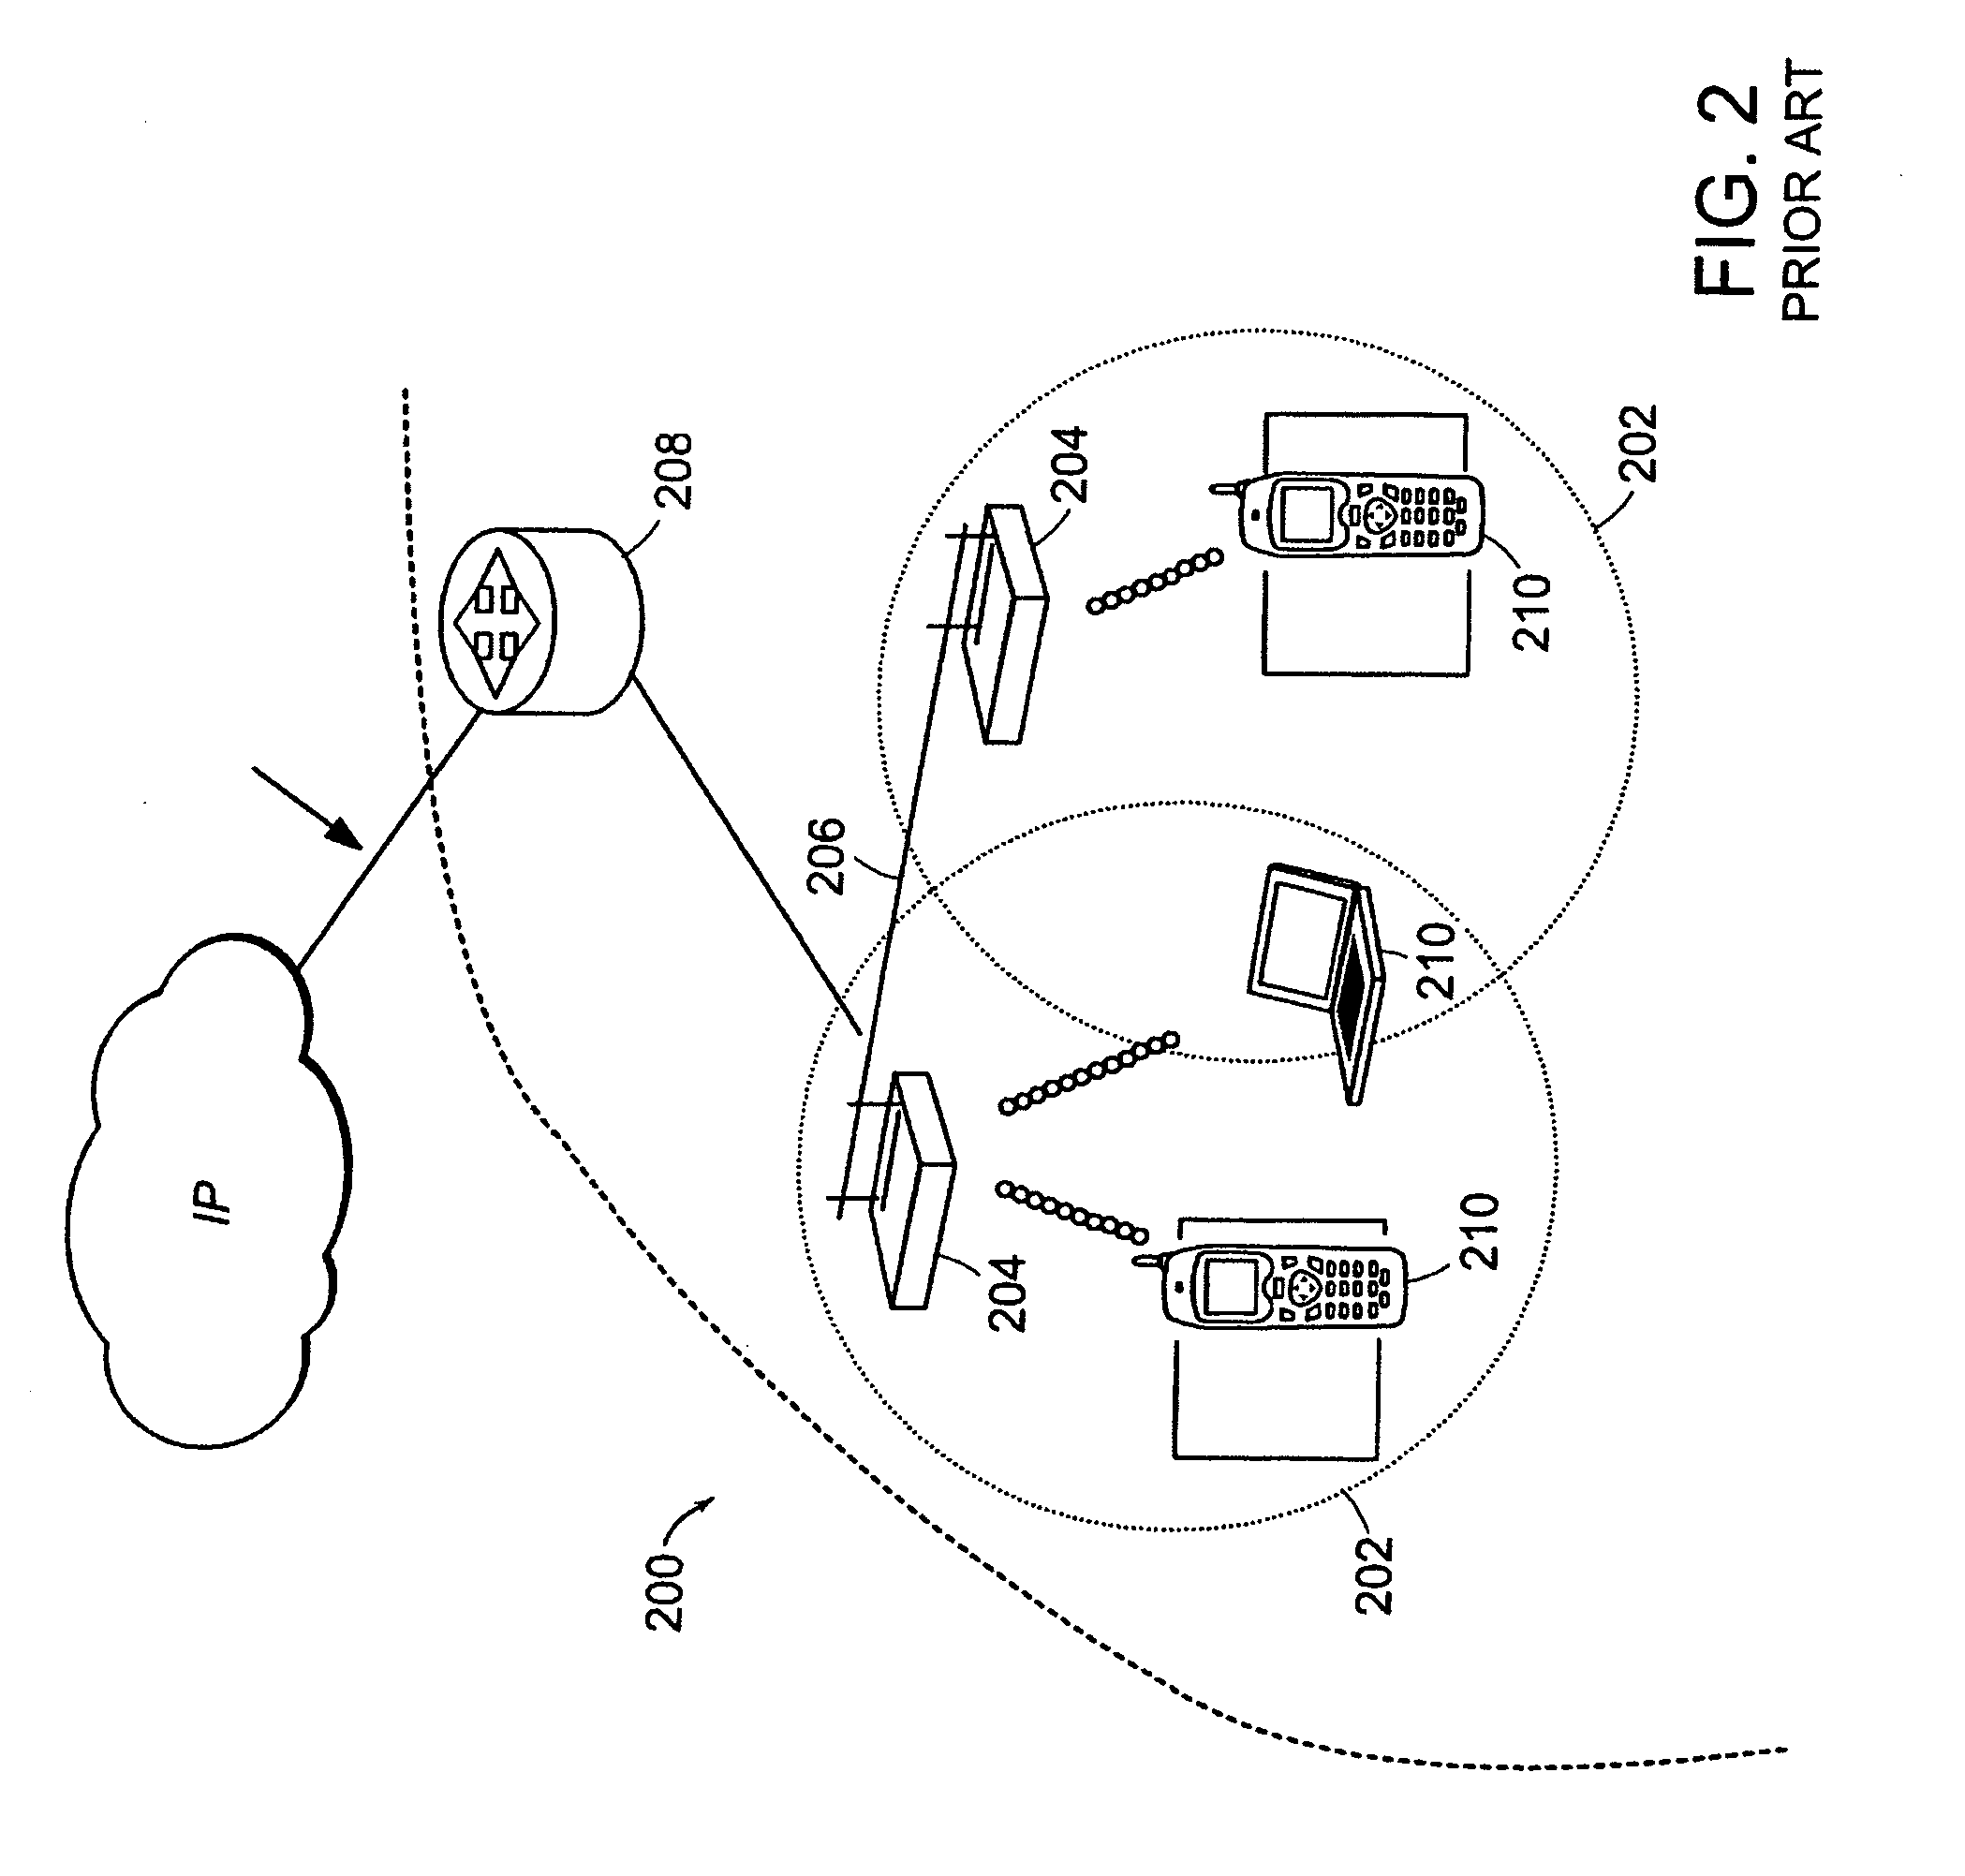 Method, system, and apparatus for a mobile station to sense and select a wireless local area network (WLAN) or a wide area mobile wireless network (WWAN)